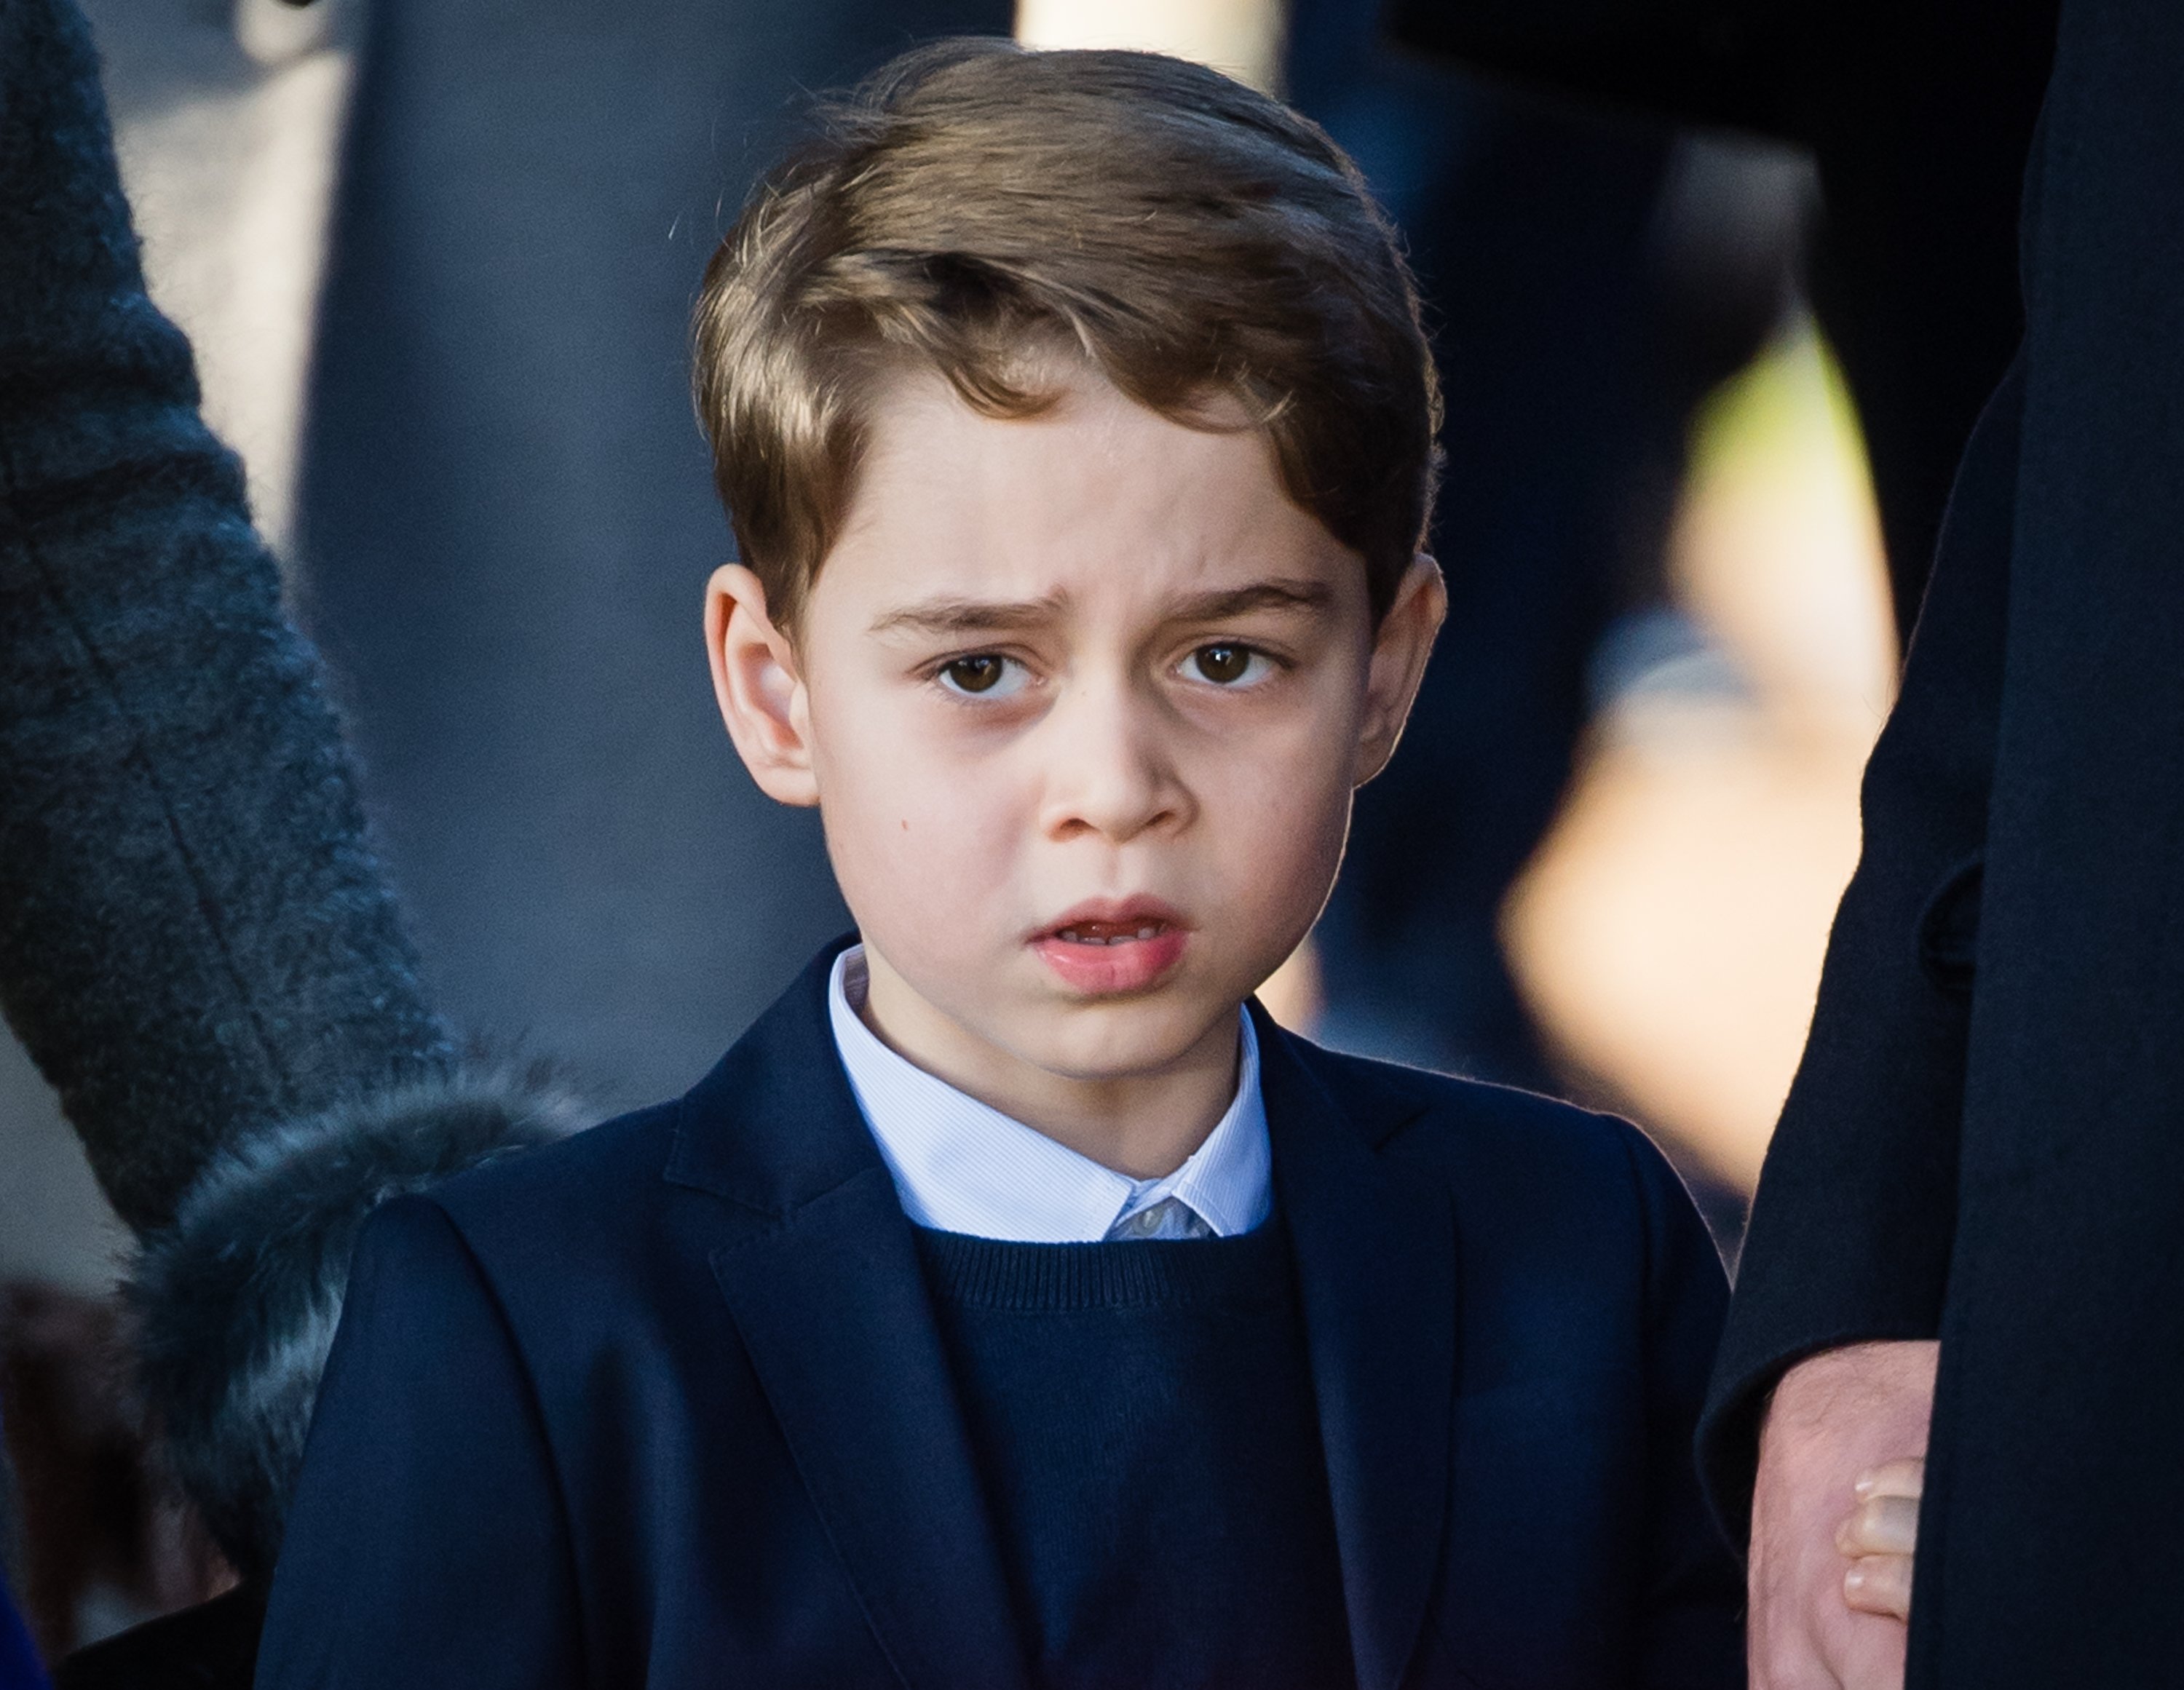 Prince George at the Christmas Day Church service at Church of St Mary Magdalene on the Sandringham estate on December 25, 2019 in King's Lynn, United Kingdom. | Source: Getty Images